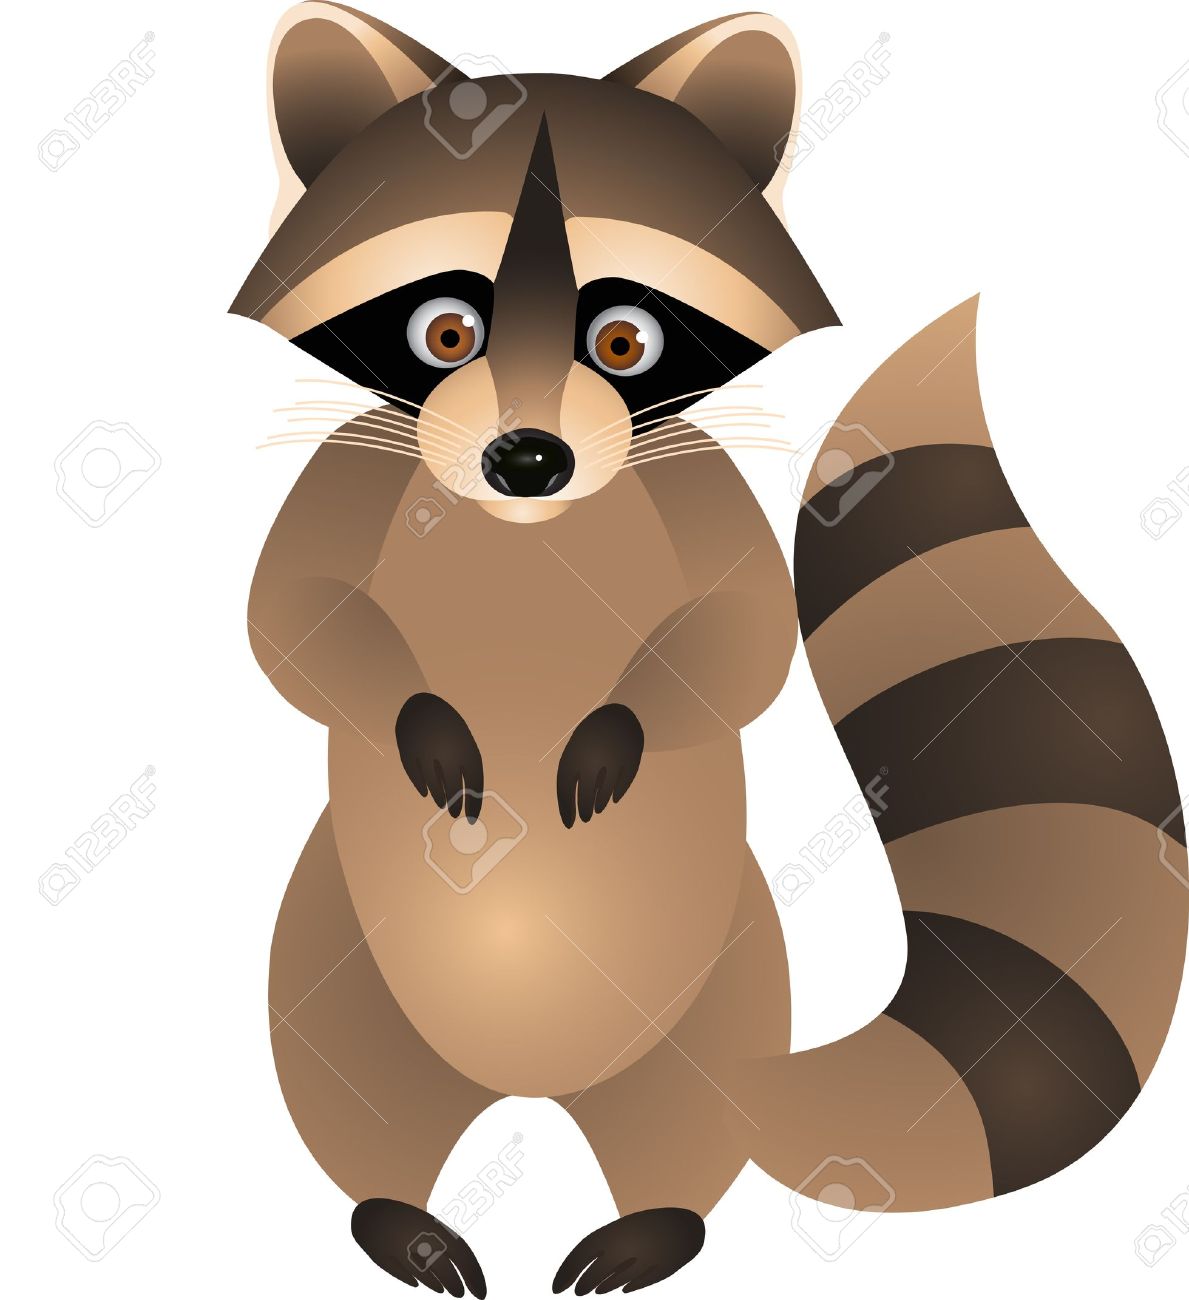 Racoon clipart #15, Download drawings